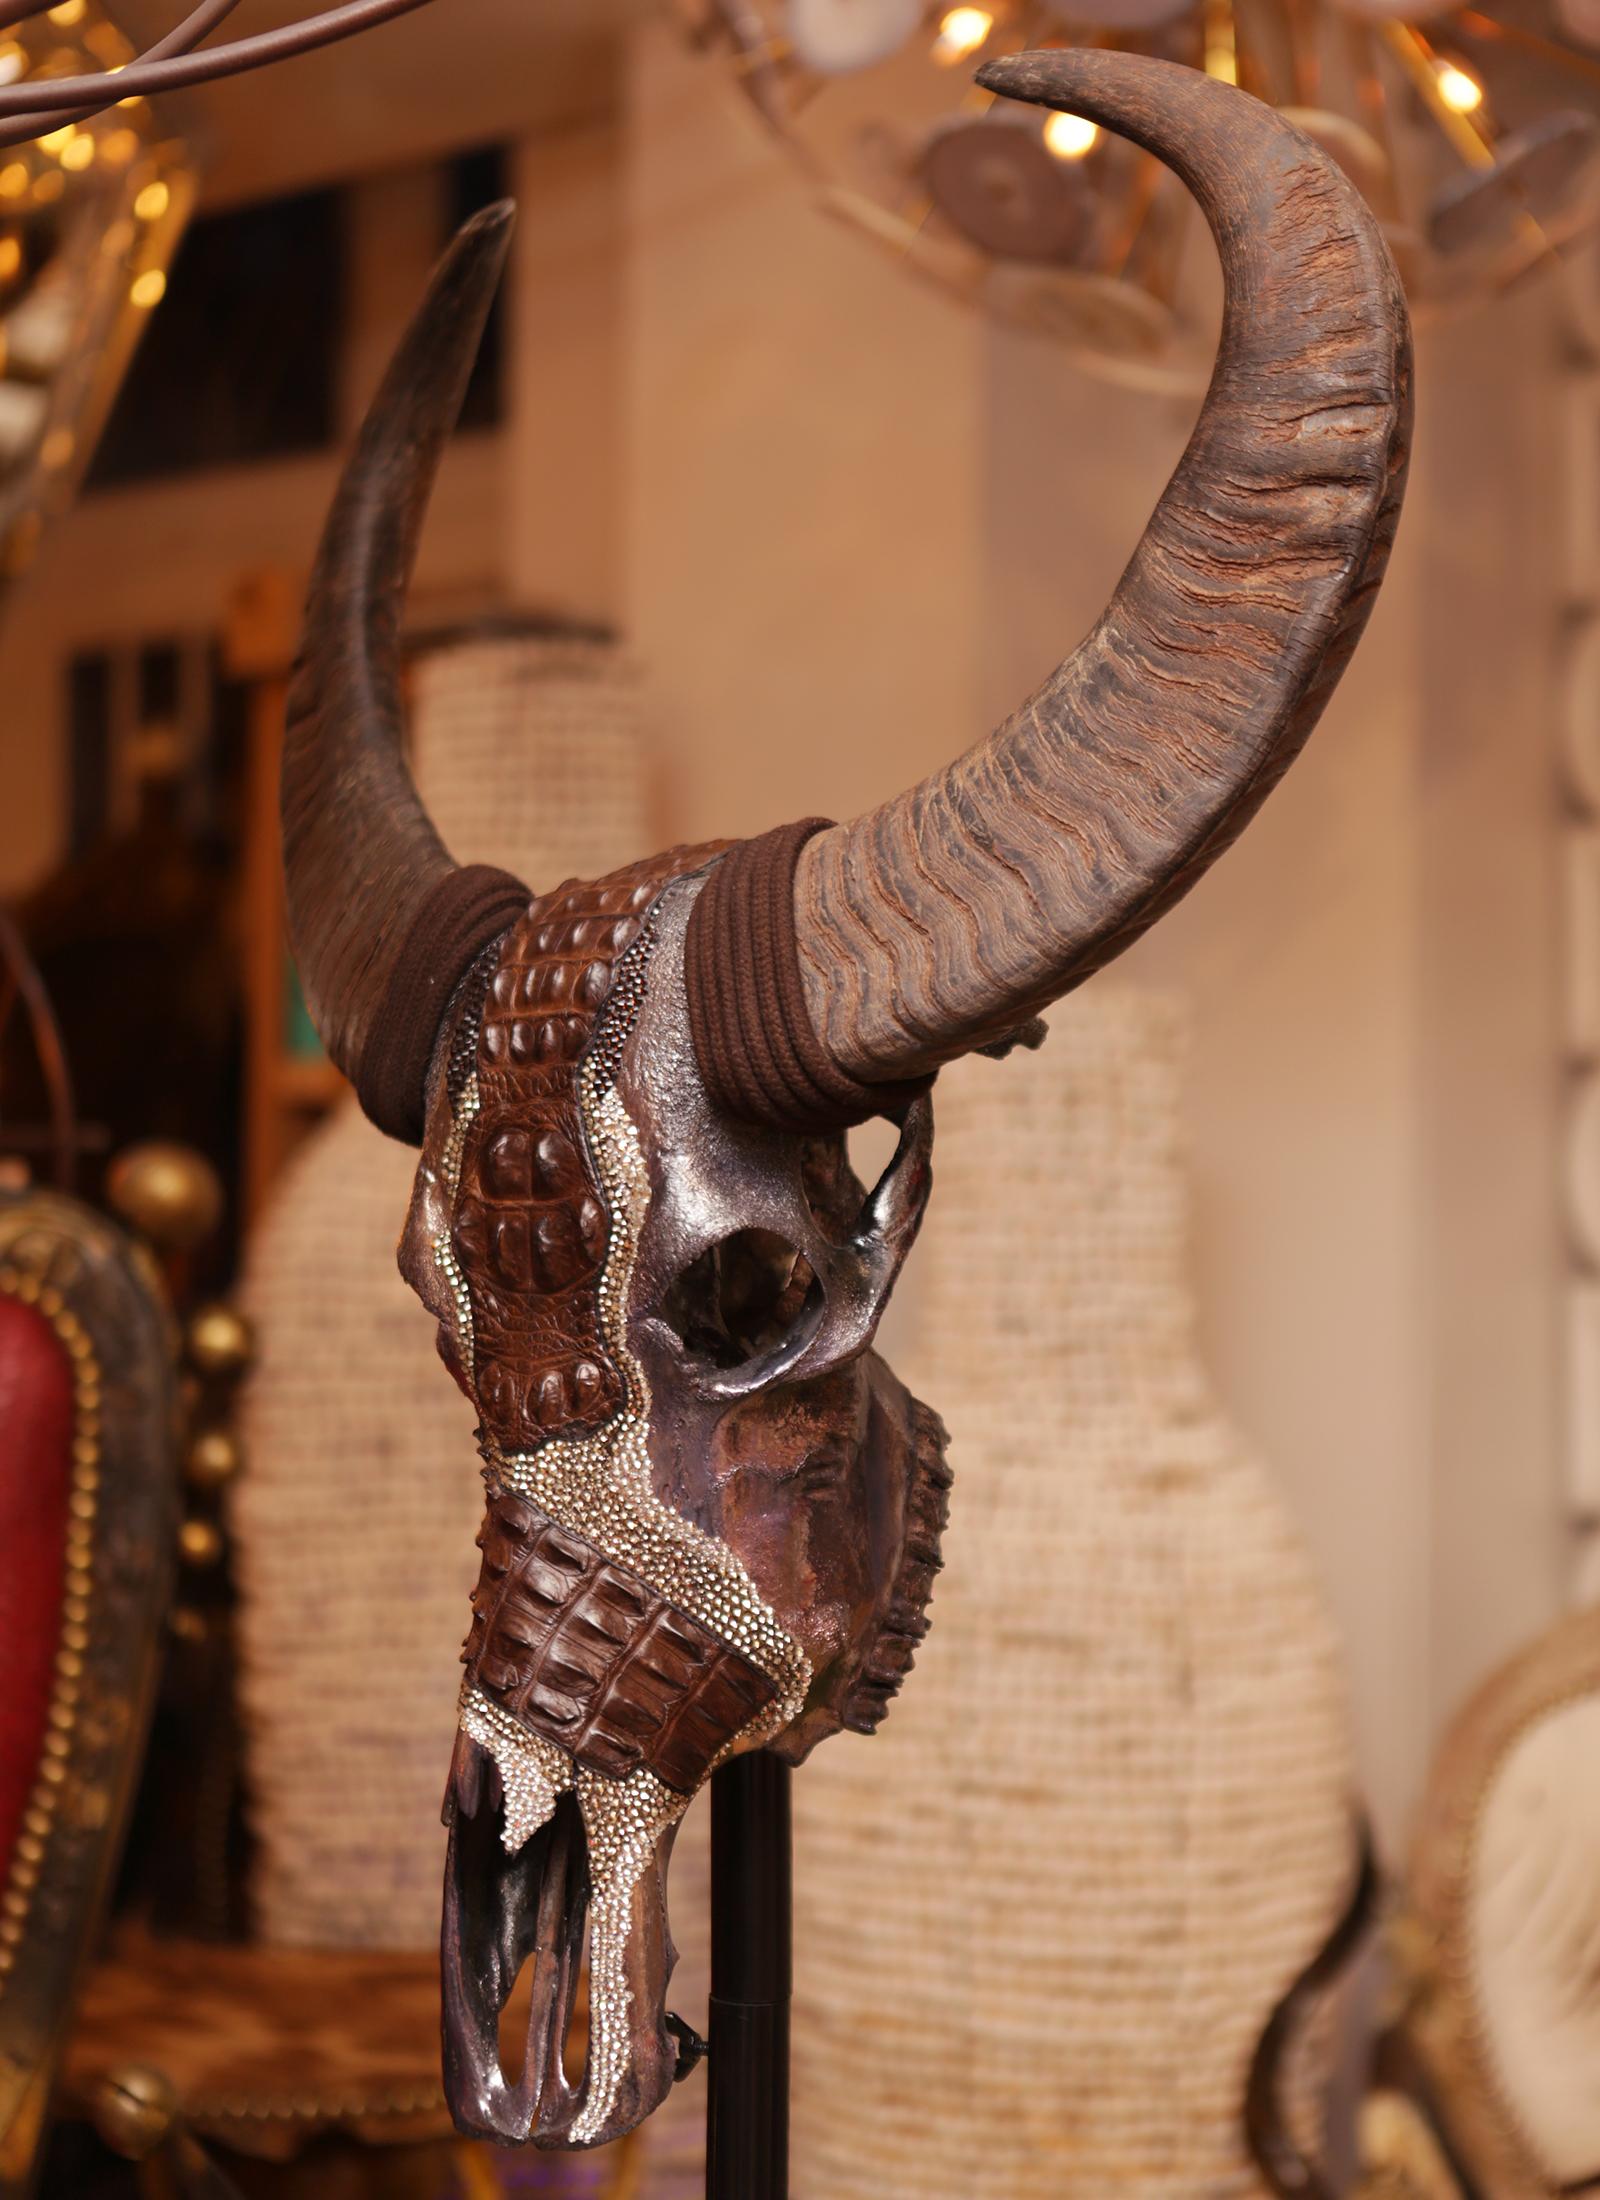 Sculpture buffalo croco made with real
Buffalo skull with horns. Skull is customized
In dark silver finish with carved shiny stones,
Brown tinted real crocodile skin. On forged
Metal base. Base height with skull included:
183cm. Exceptional and